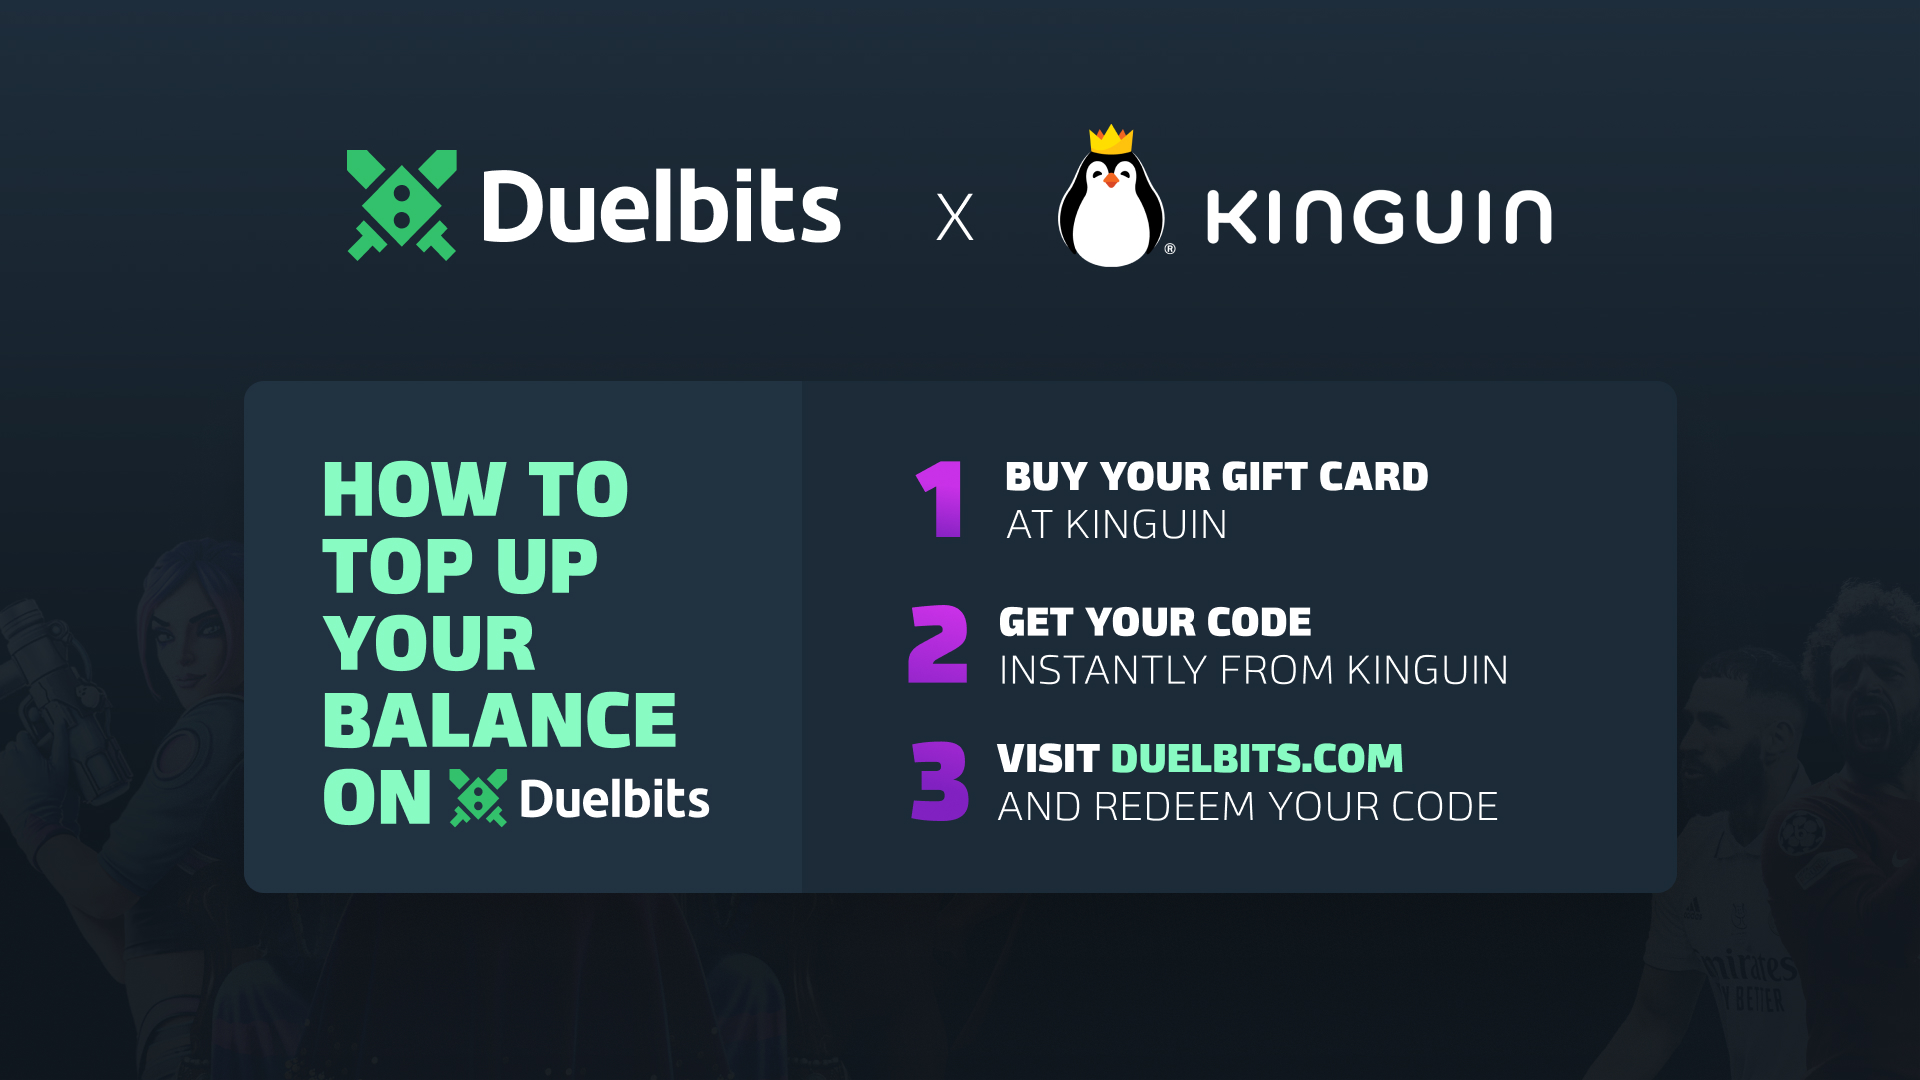 DuelBits $5 Gift Card, 6.27 usd